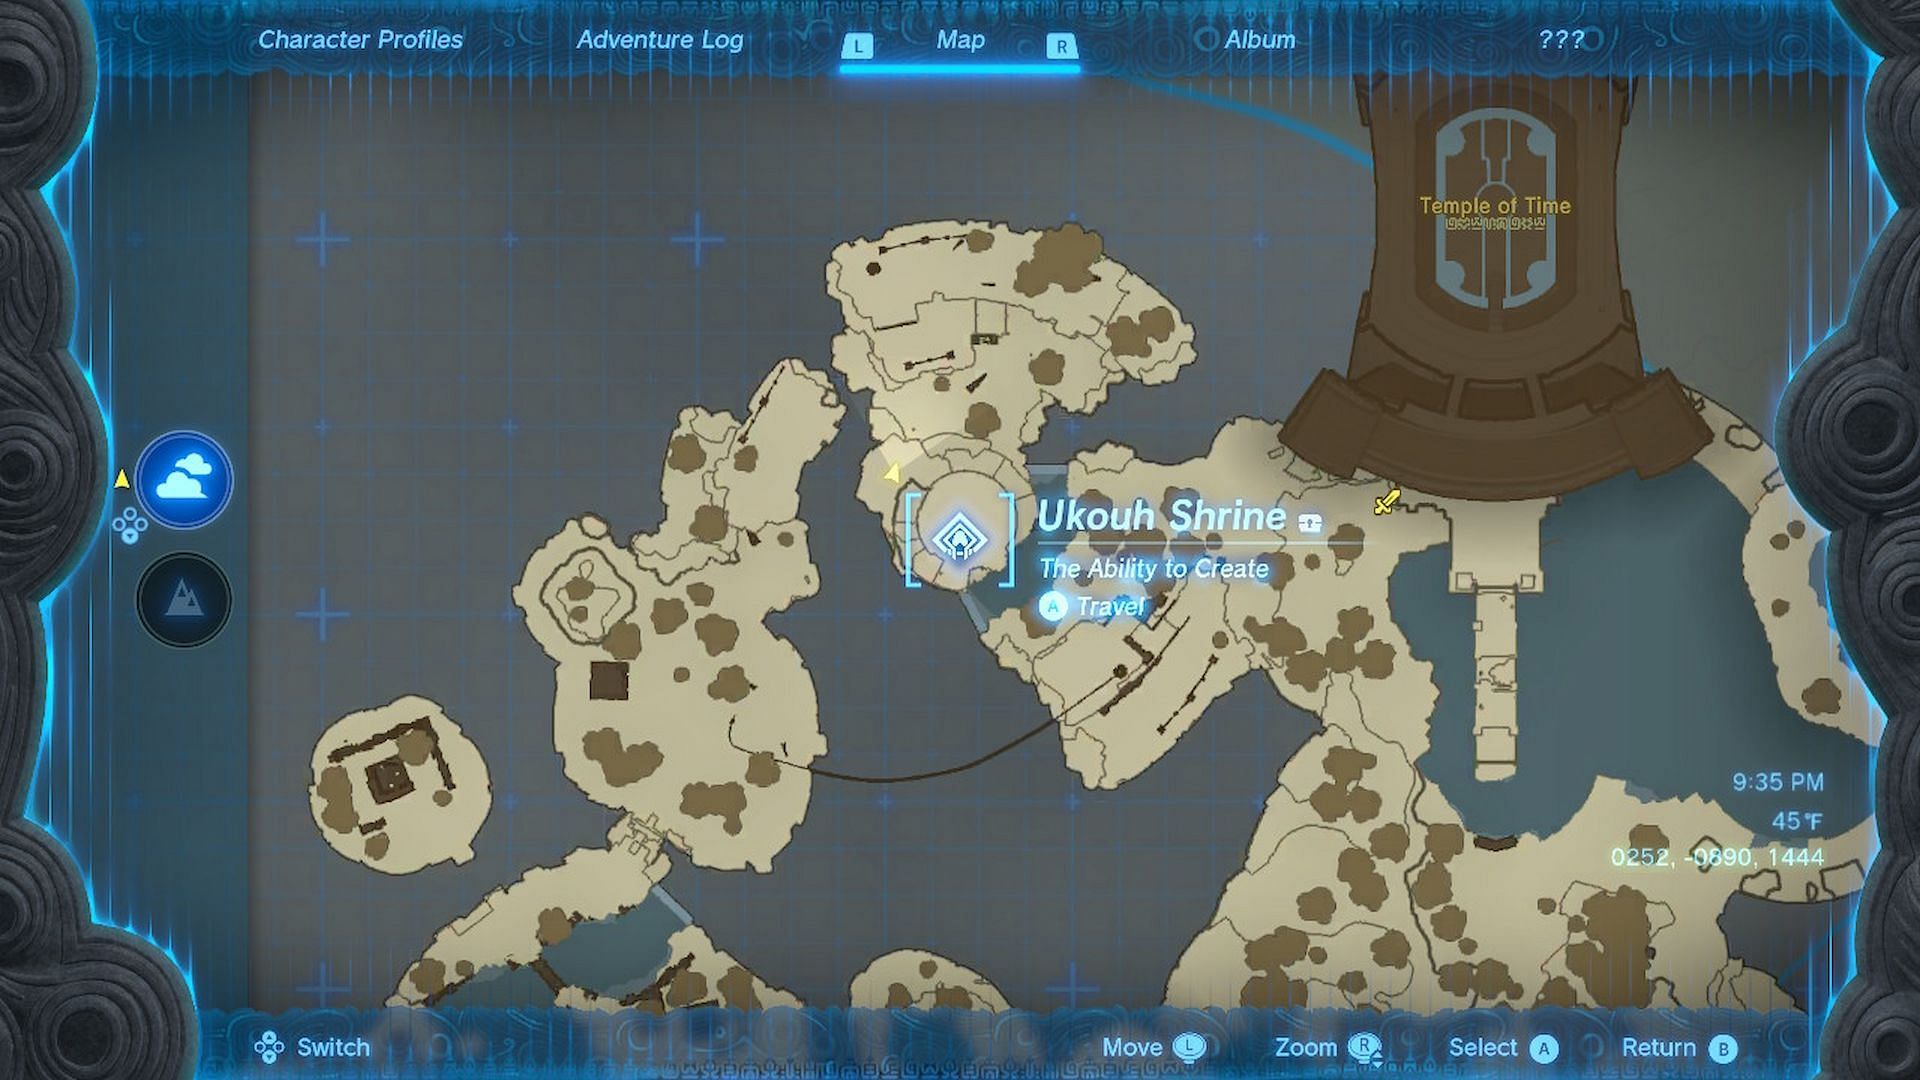 The location of the Ukouh shrine in Tears of the Kingdom (Image via Nintendo)